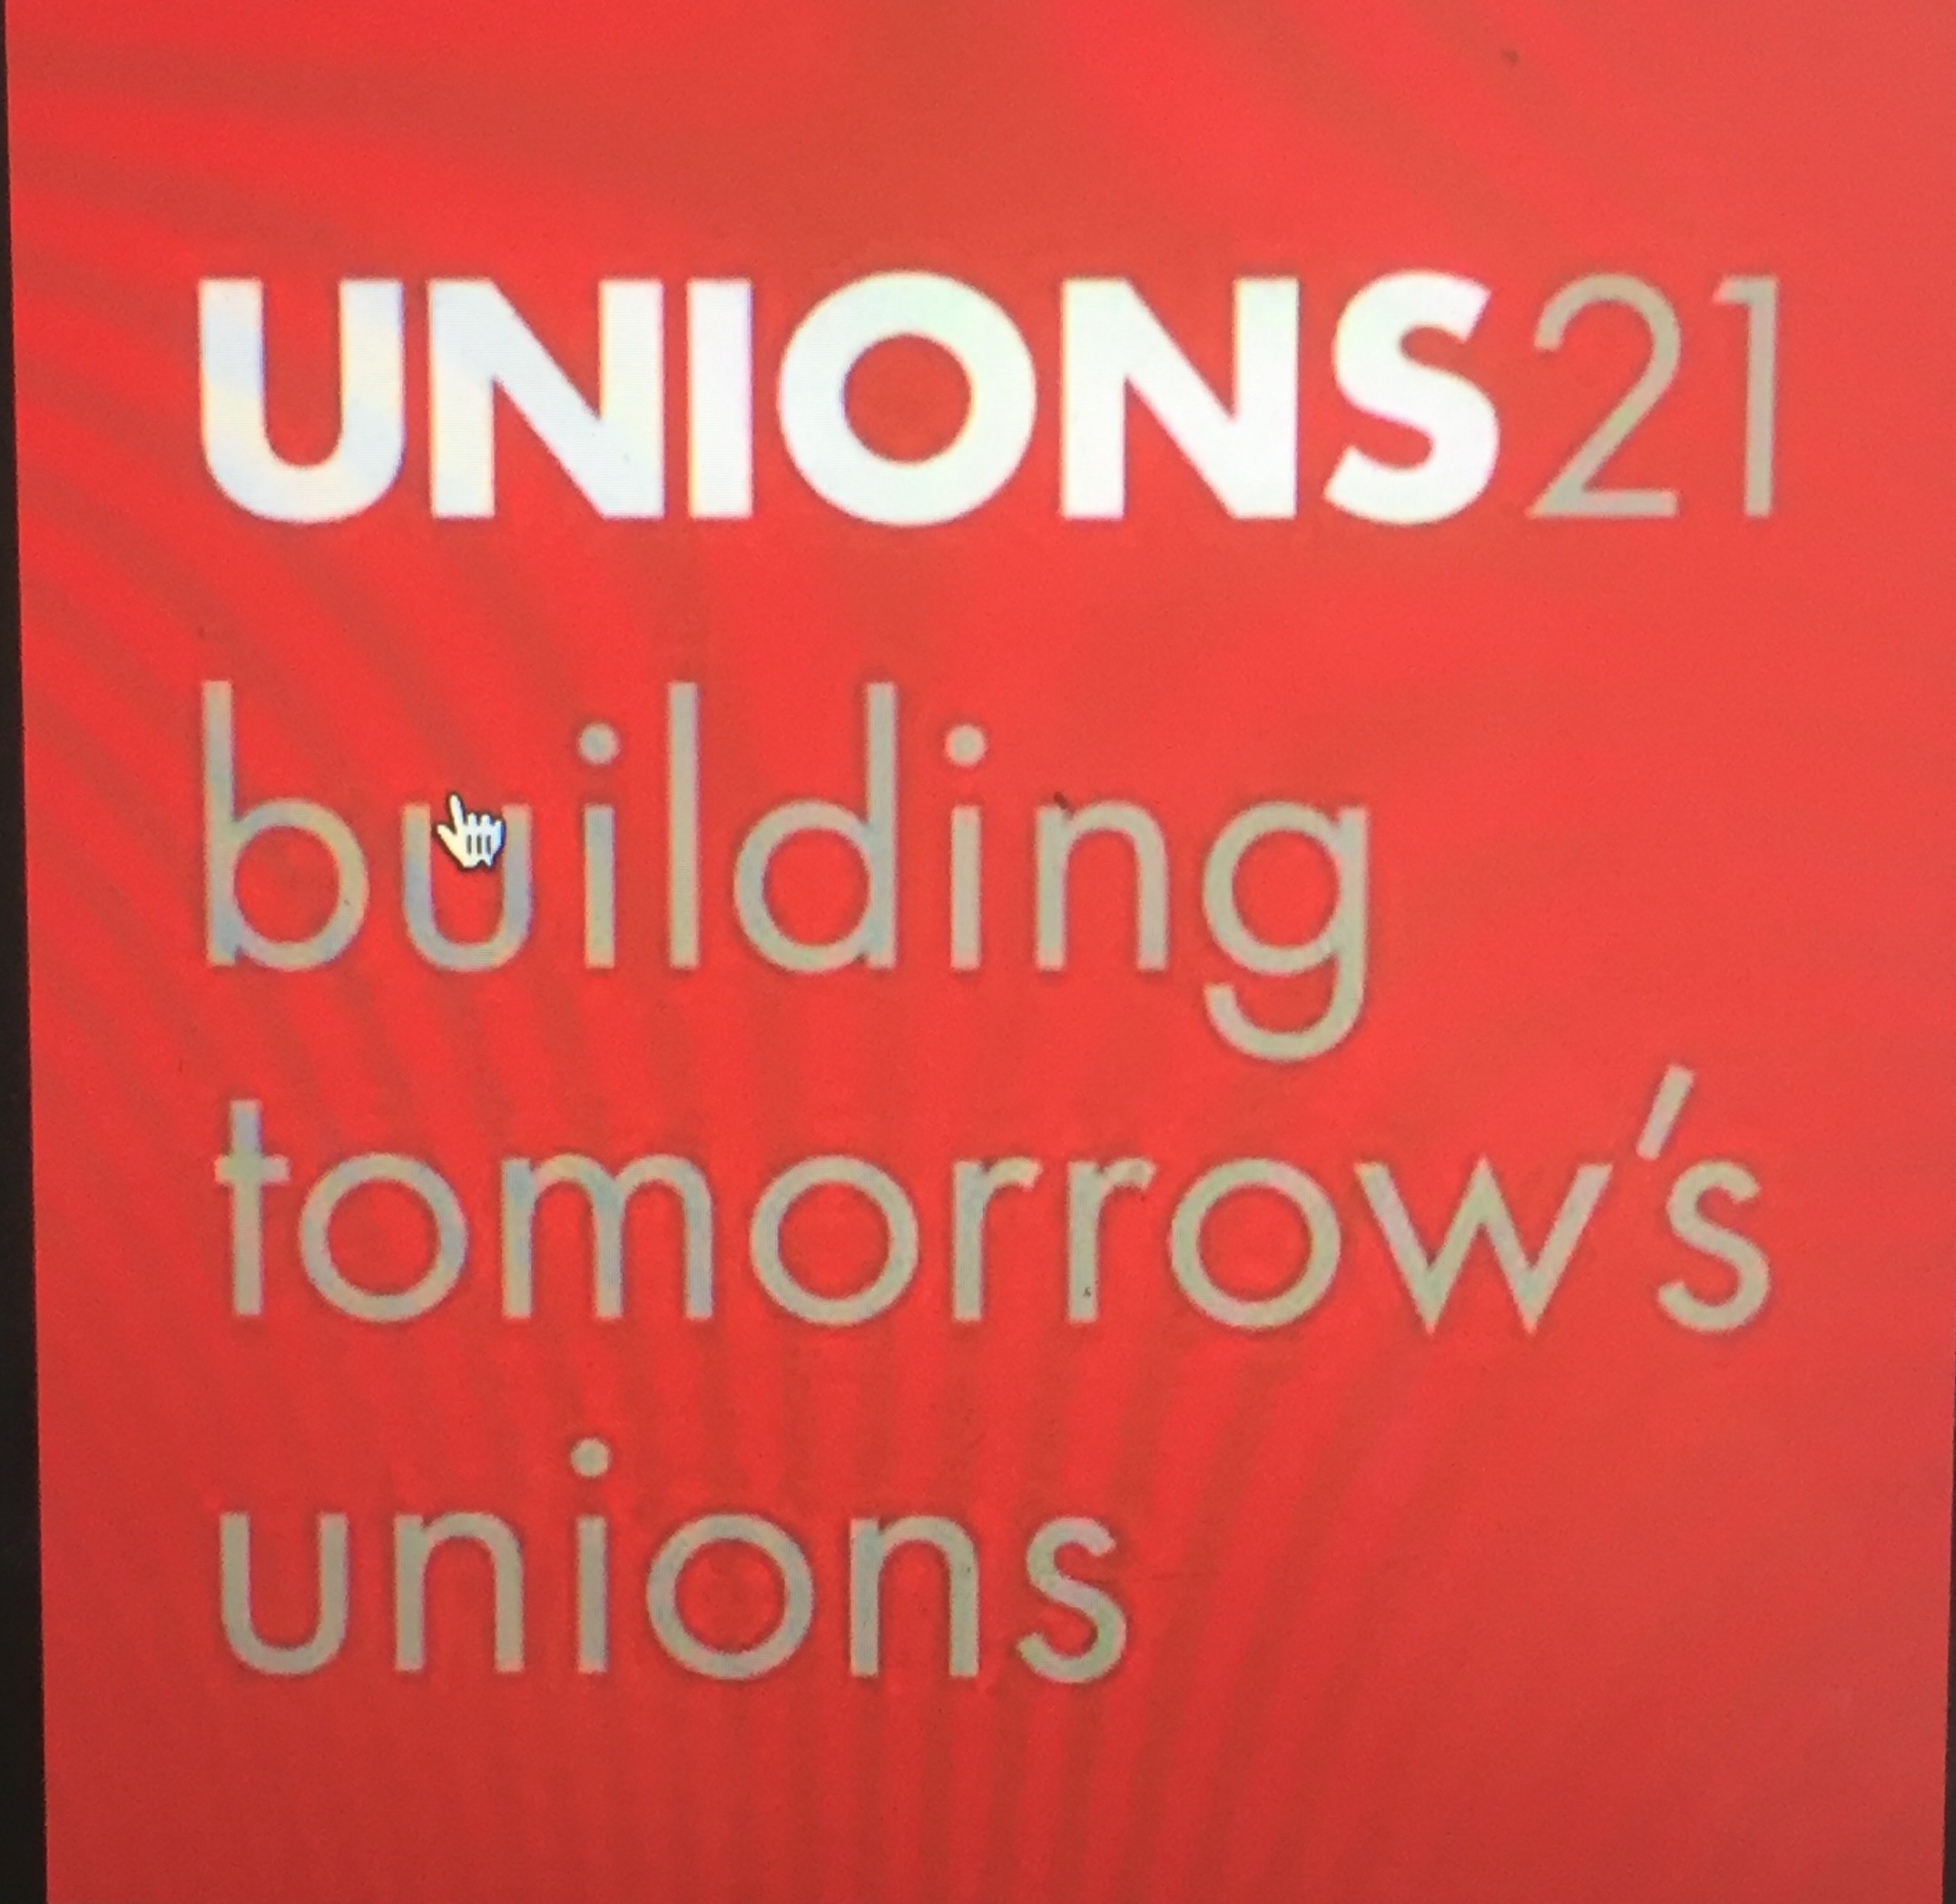 Special Episode: US unions respond after Janus case - holed below the waterline, or conservative own-goal?